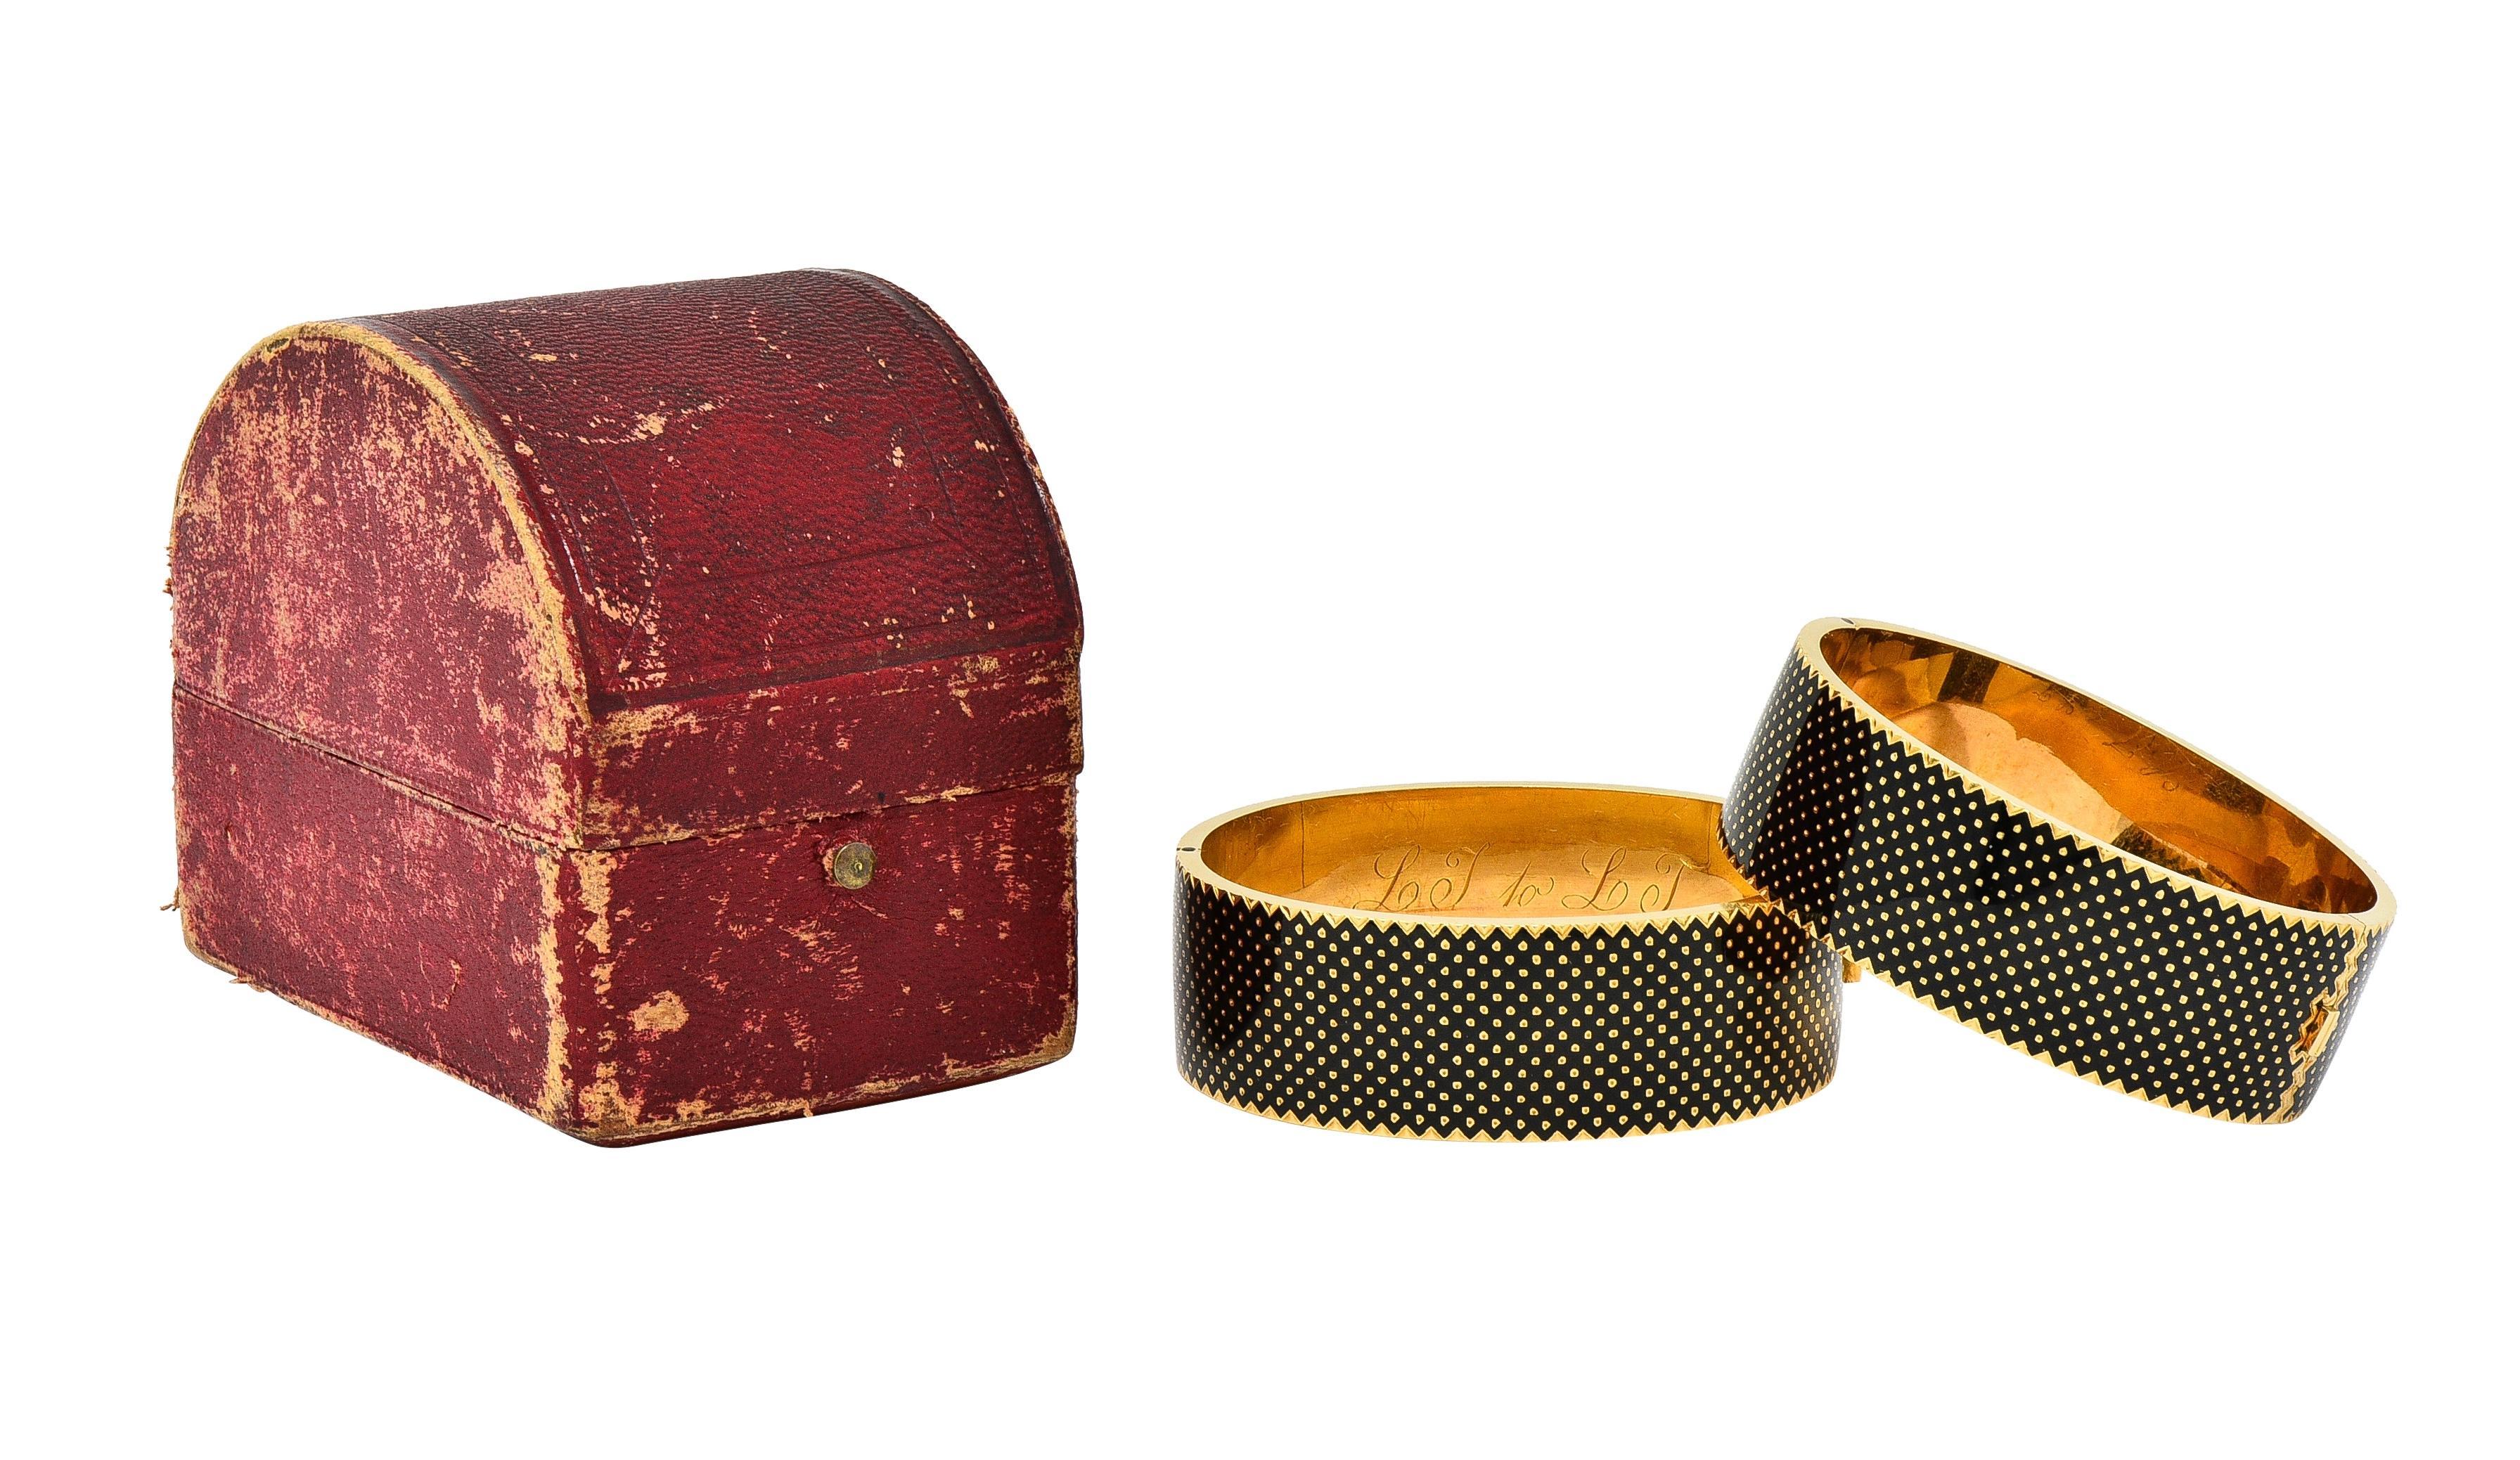 Designed as matching wide gold bangles featuring glossy black enamel panels 
Opaque with chevron motif edges and gold polka dot pattern throughout
Exhibiting minimal loss - each inscribed 'L.J. to L.T.'
Both open on a hinge via press release